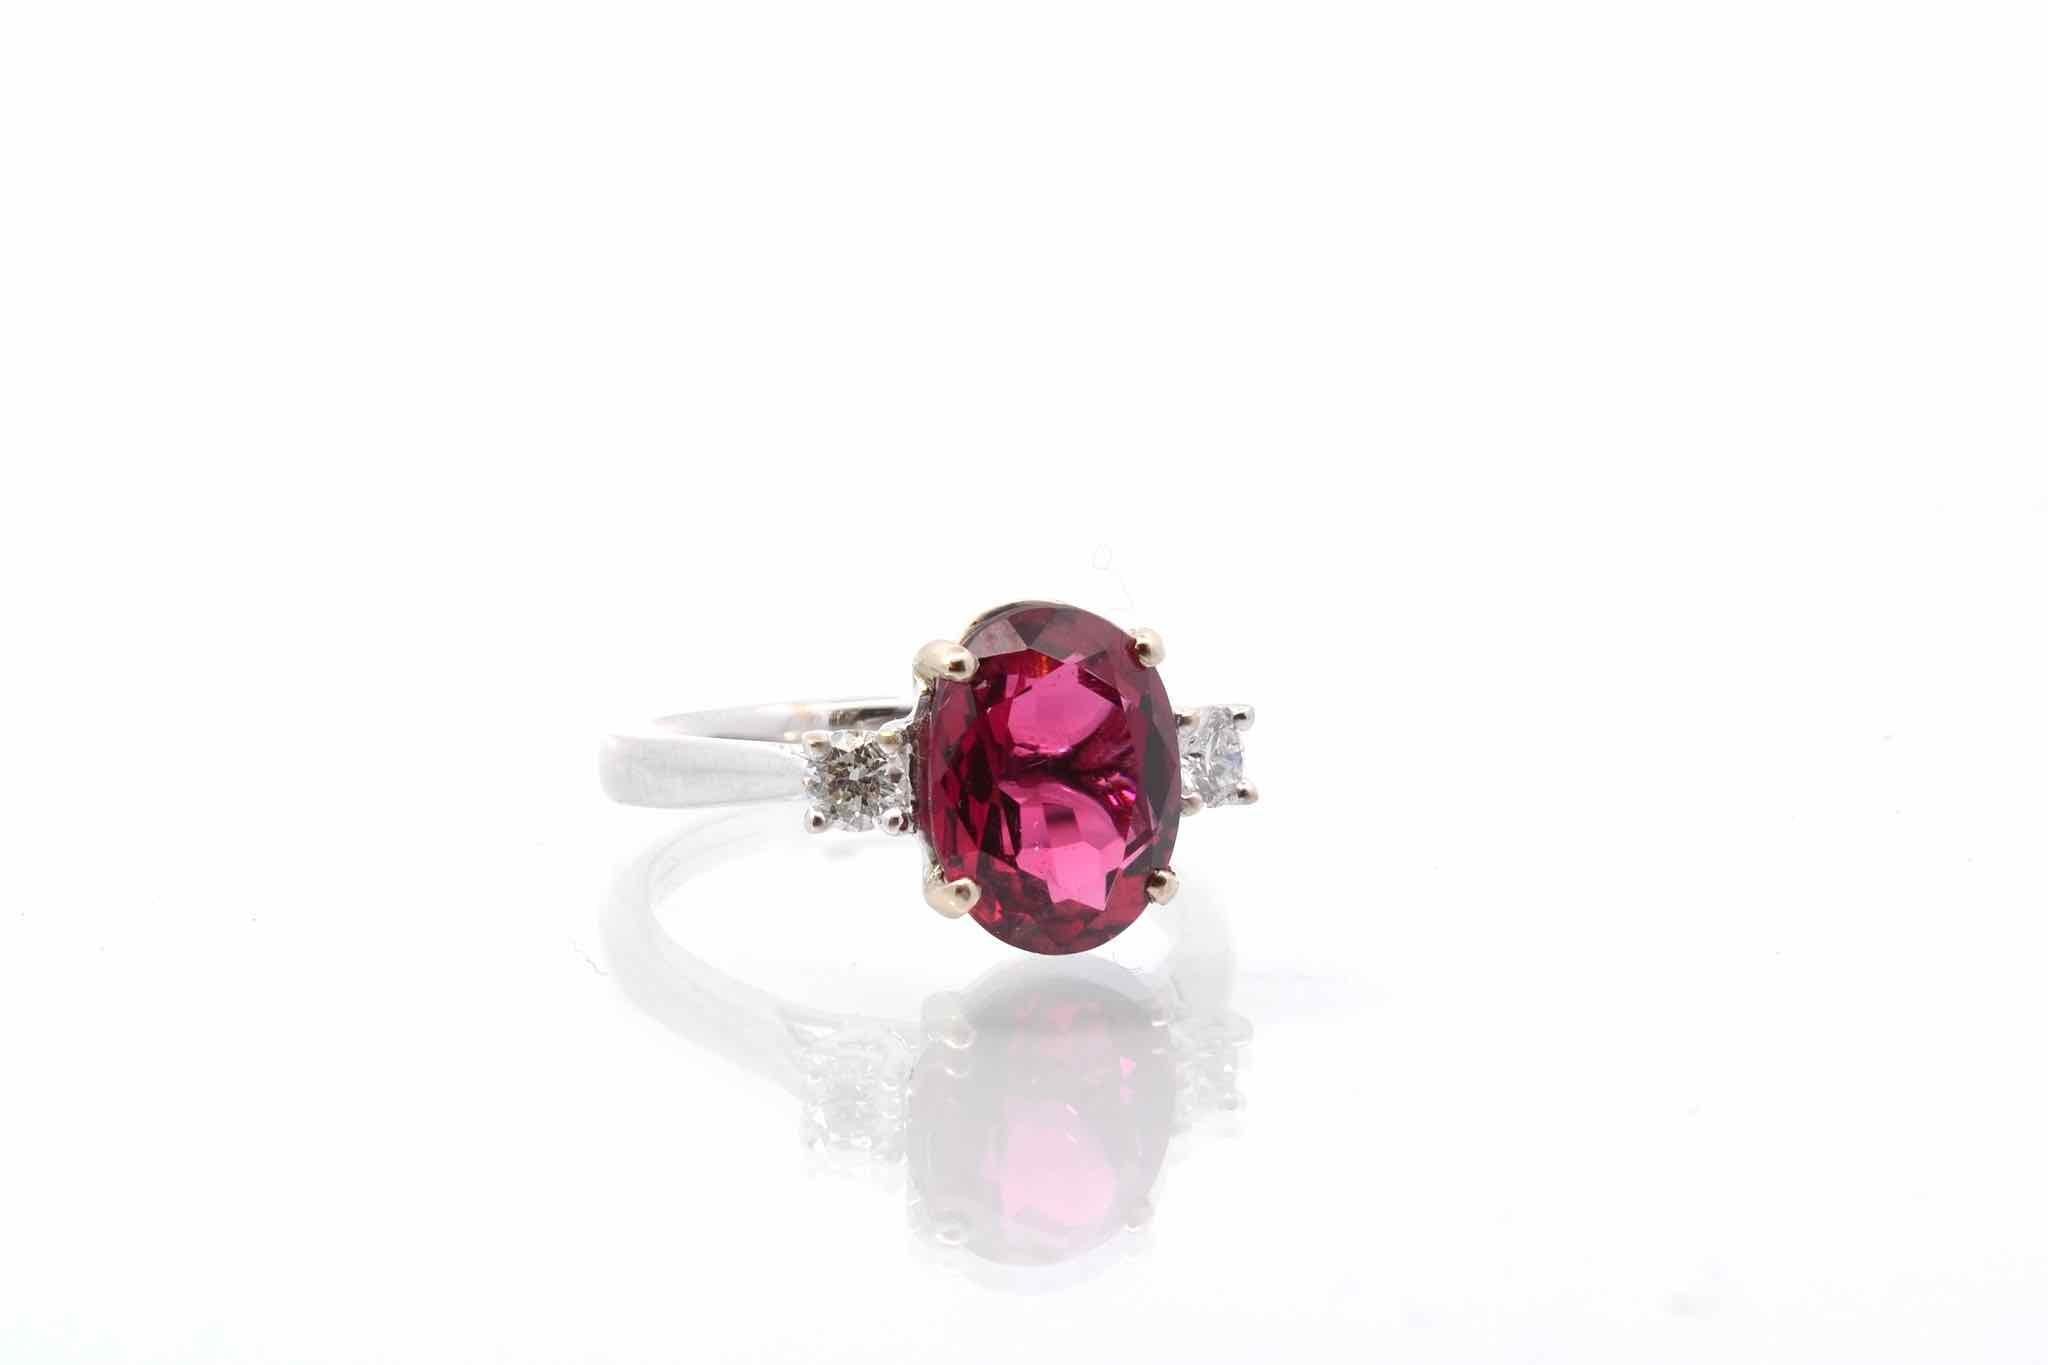 Oval Cut Tourmaline rubellite and diamonds ring in white gold